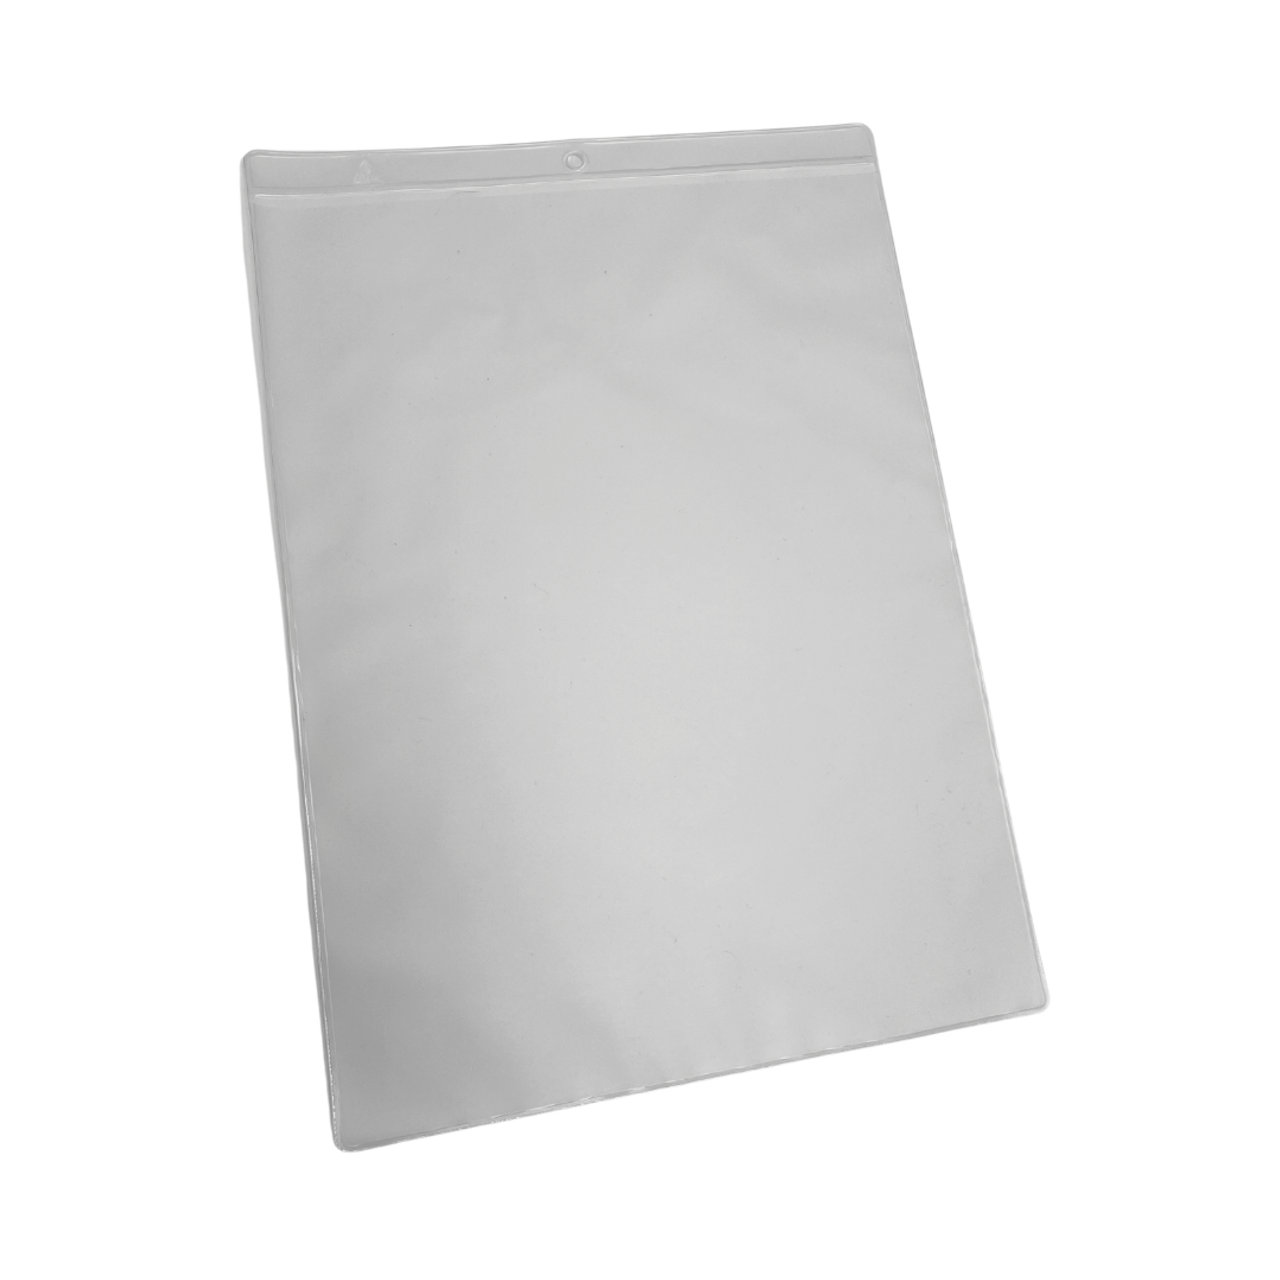 Sheet Protectors; Multiple Sizes, Sewn, ESD Static Safe Clear Vinyl,  100/pack, AR-20706.5-SW-OP - Cleanroom World